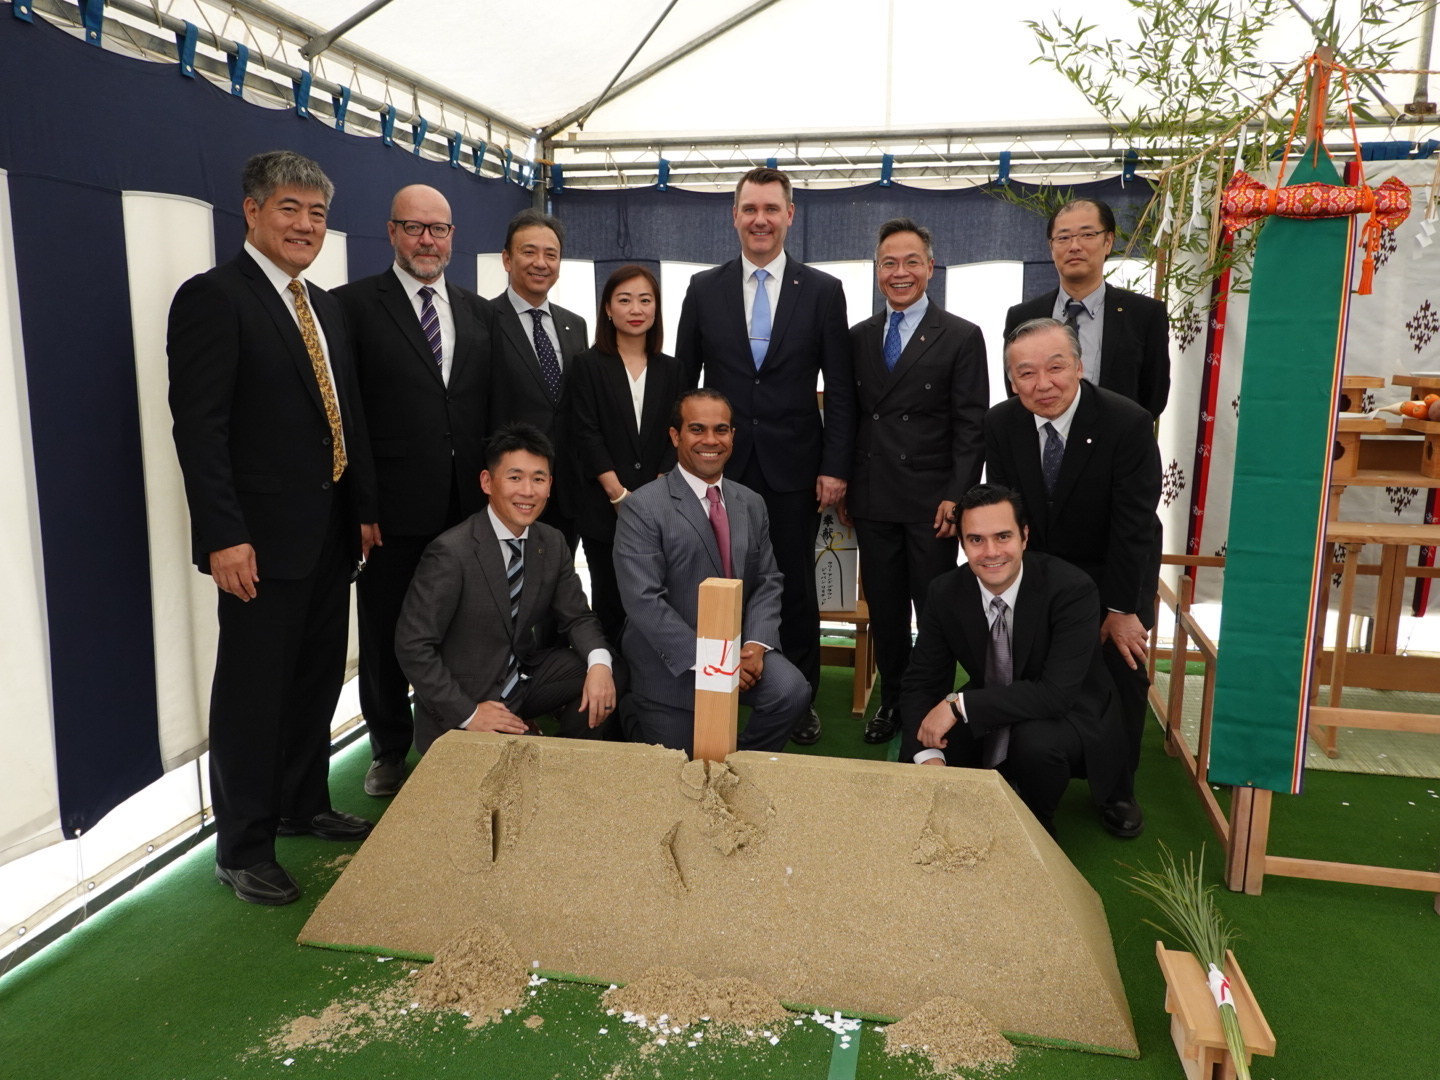 Carnival Corporation officially launched the construction of a new cruise terminal at the port of Sasebo